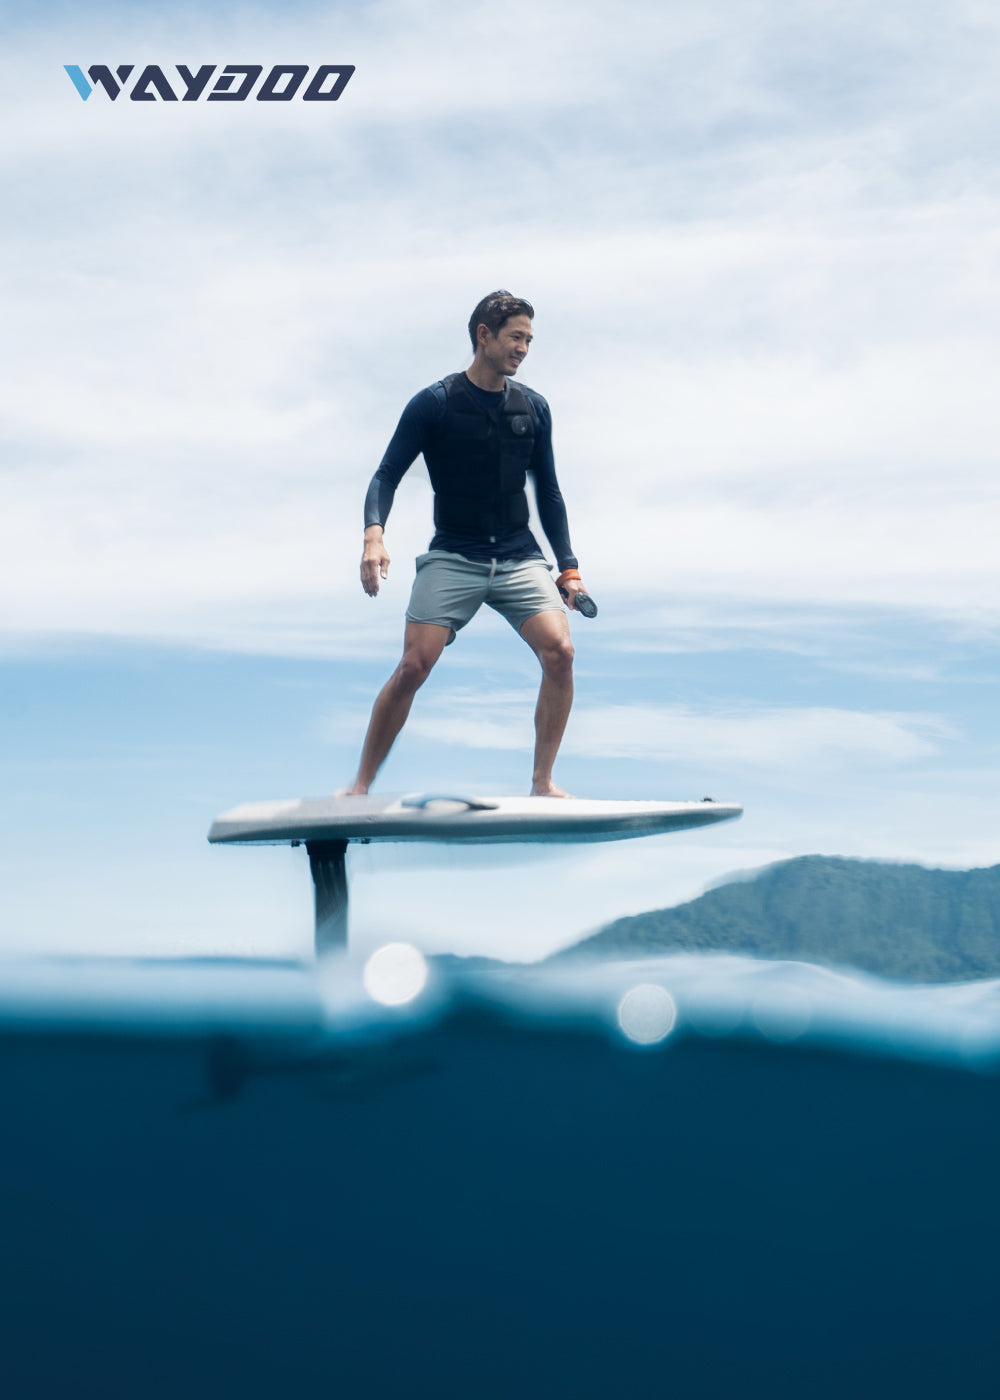 Waydoo eFoil | Electric Hydrofoil for Everyone.